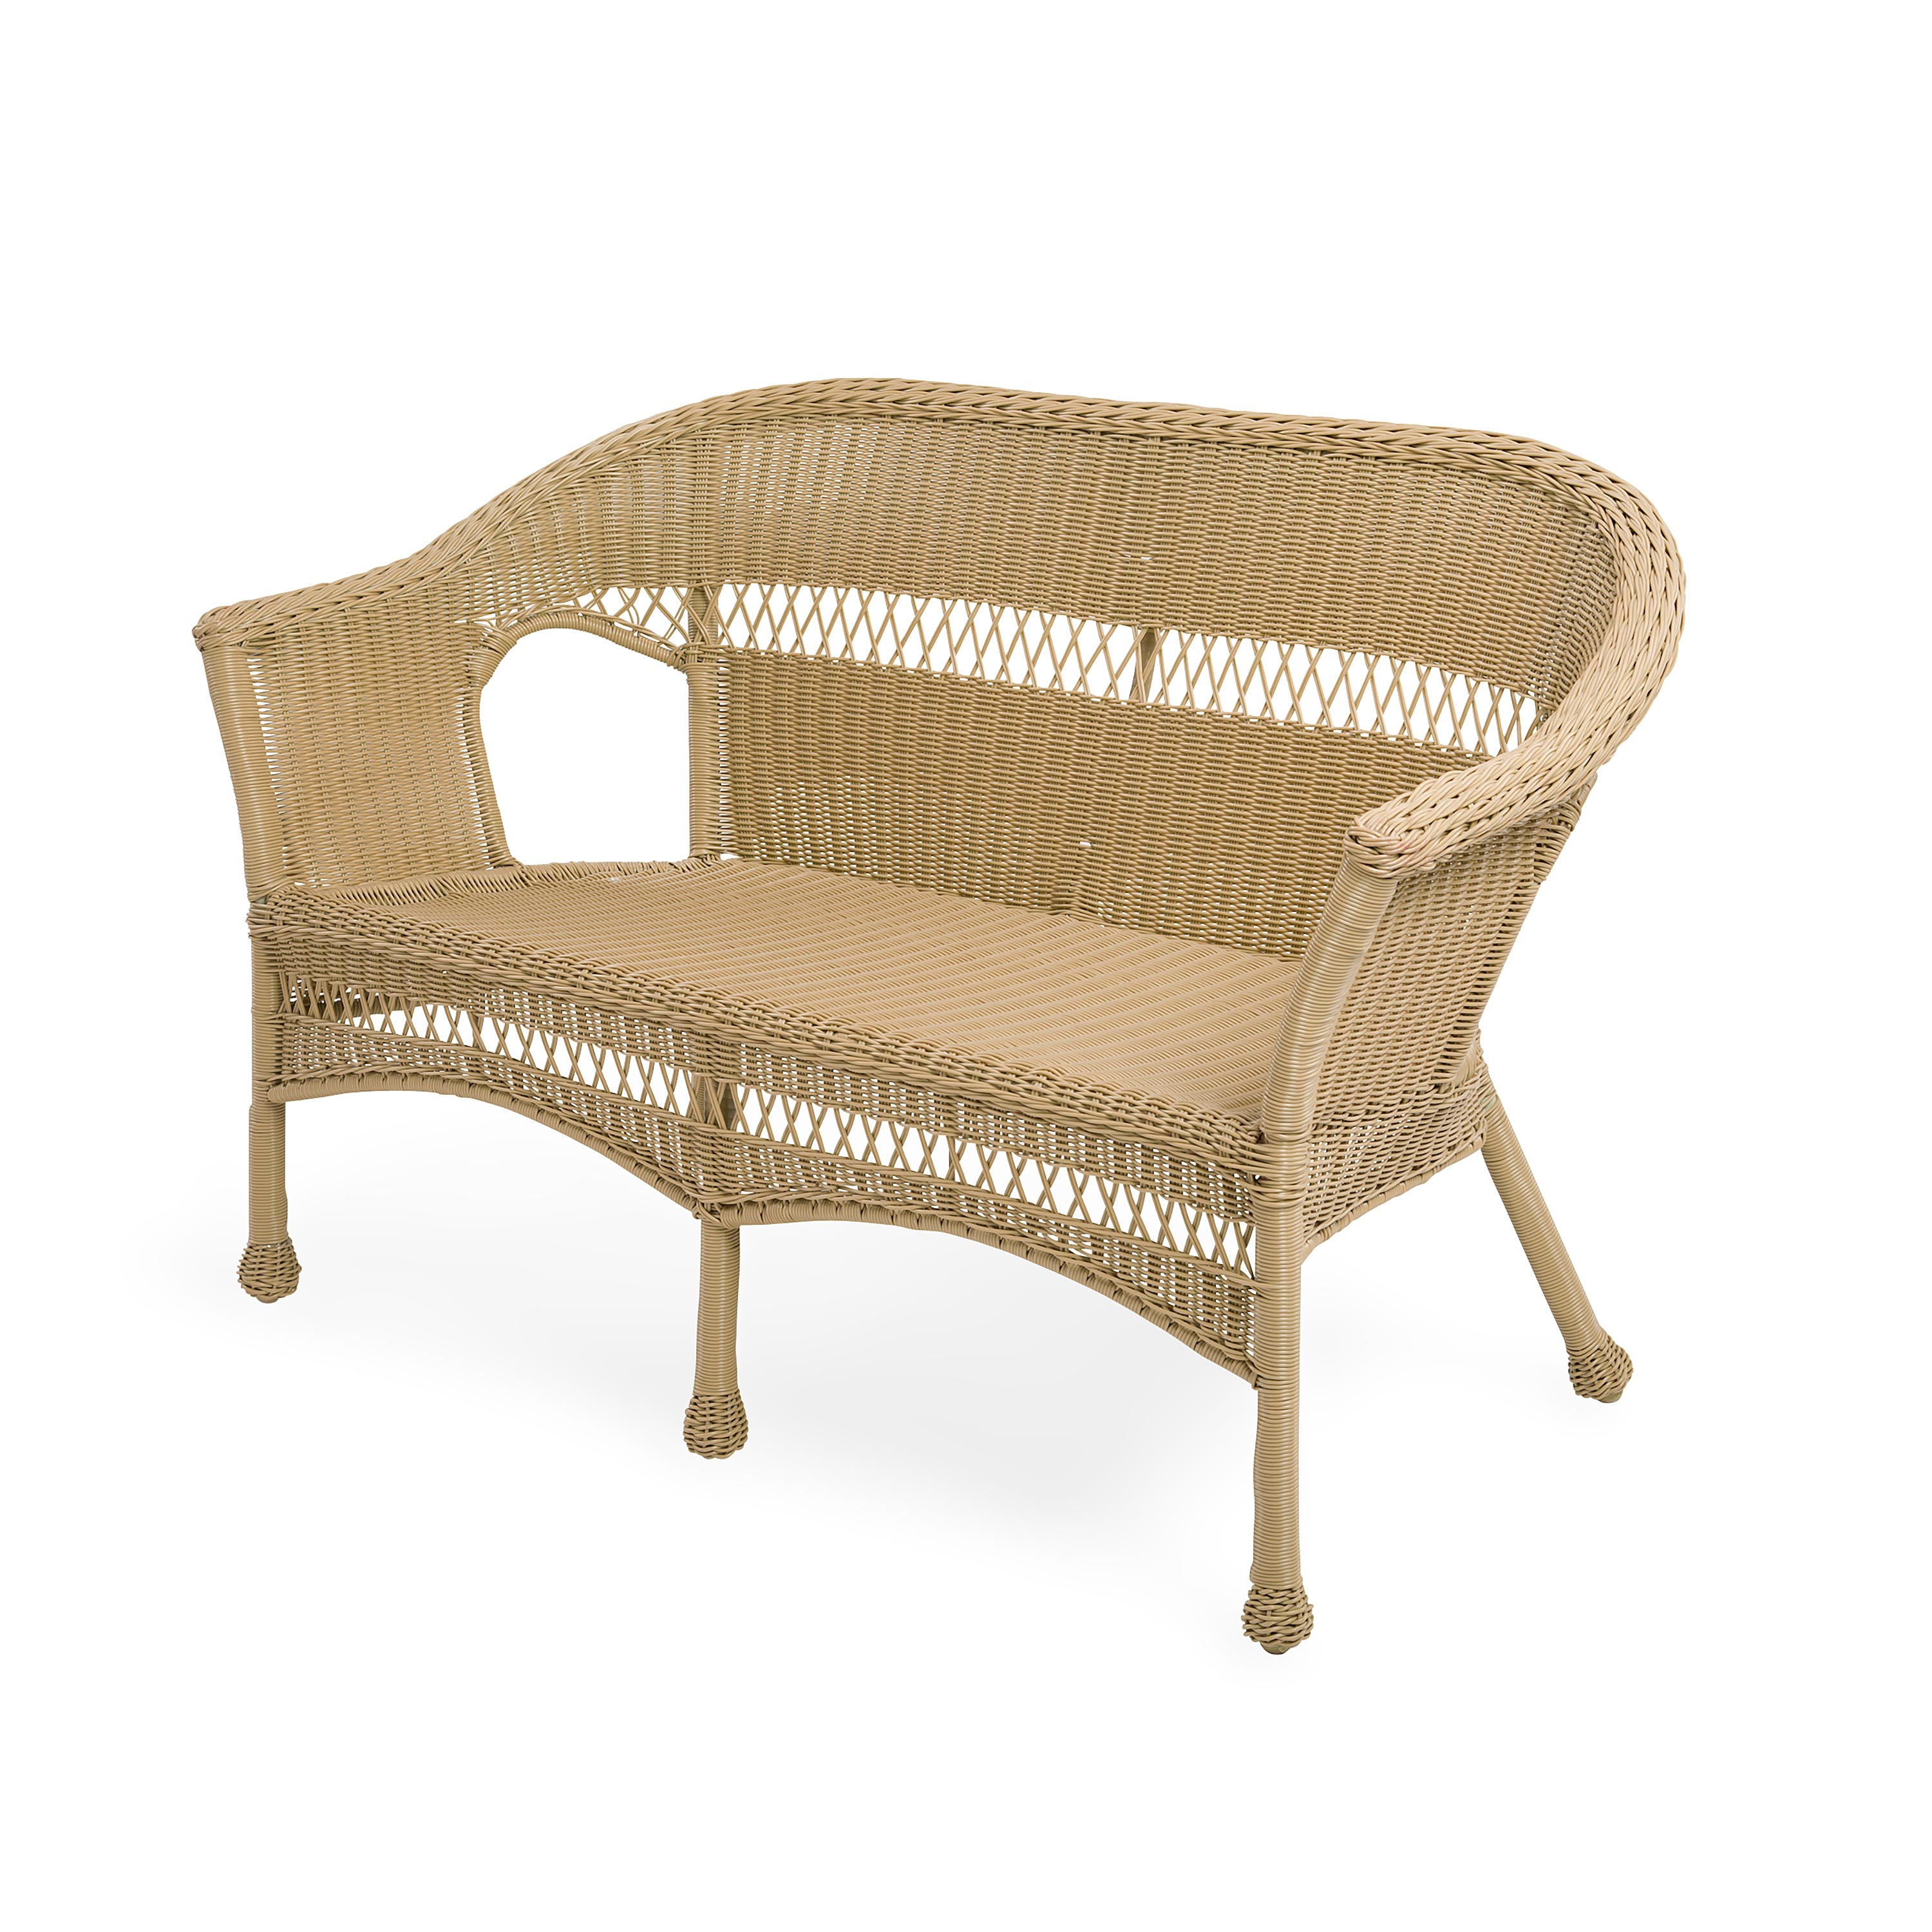 Easy Care Resin Wicker Love Seat - Natural